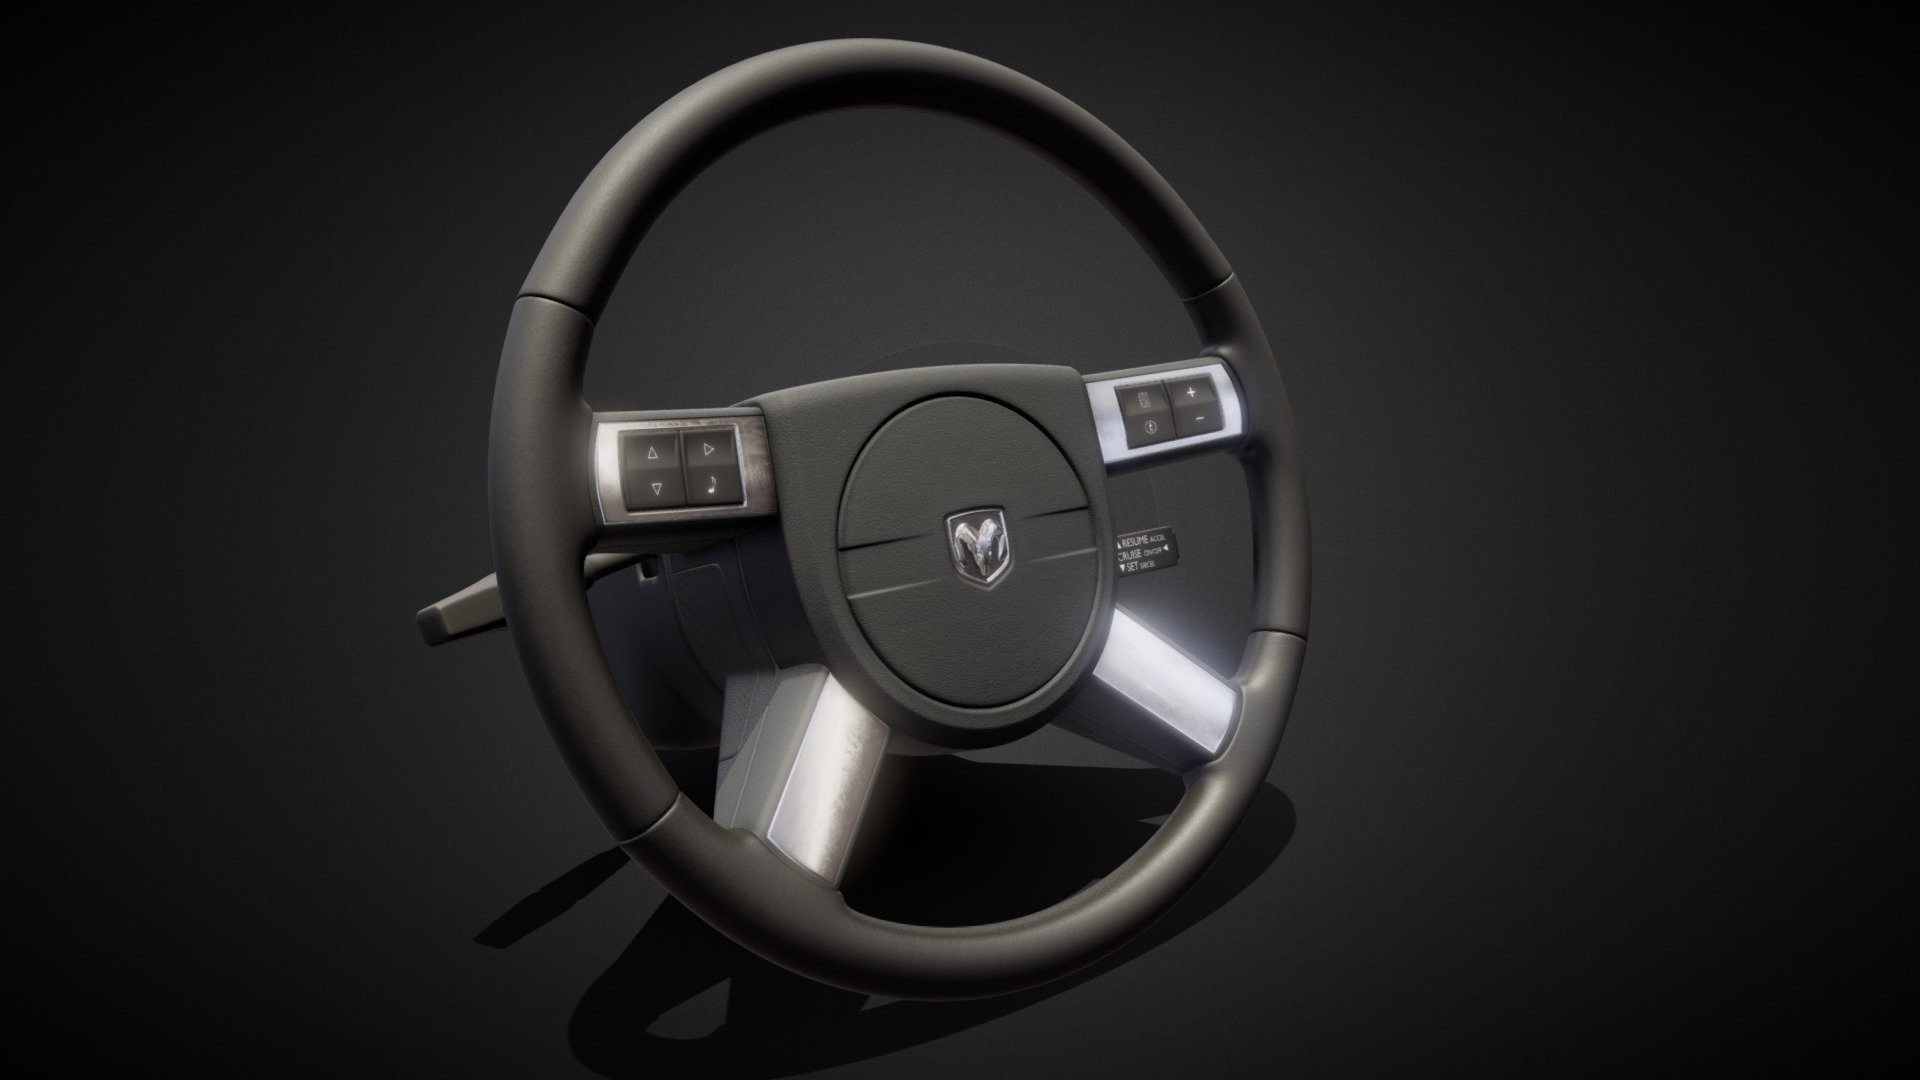 Hi! This is the steering wheel of a Dodge Charger 2008 car. I made the model very detailed and so it fits into the interior for very accurate visualizations 3d model